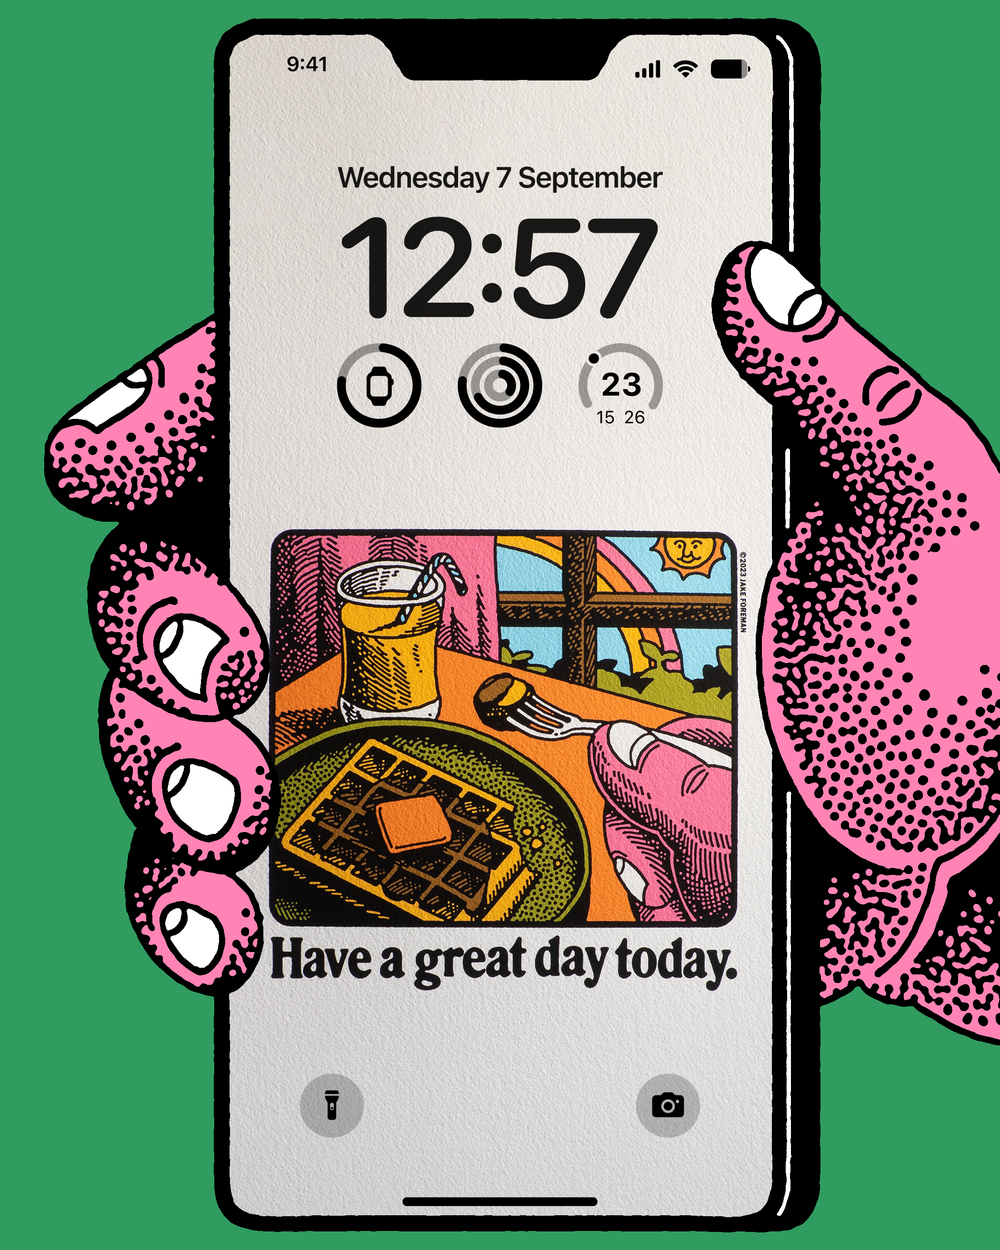 Great Day iPhone Wallpaper